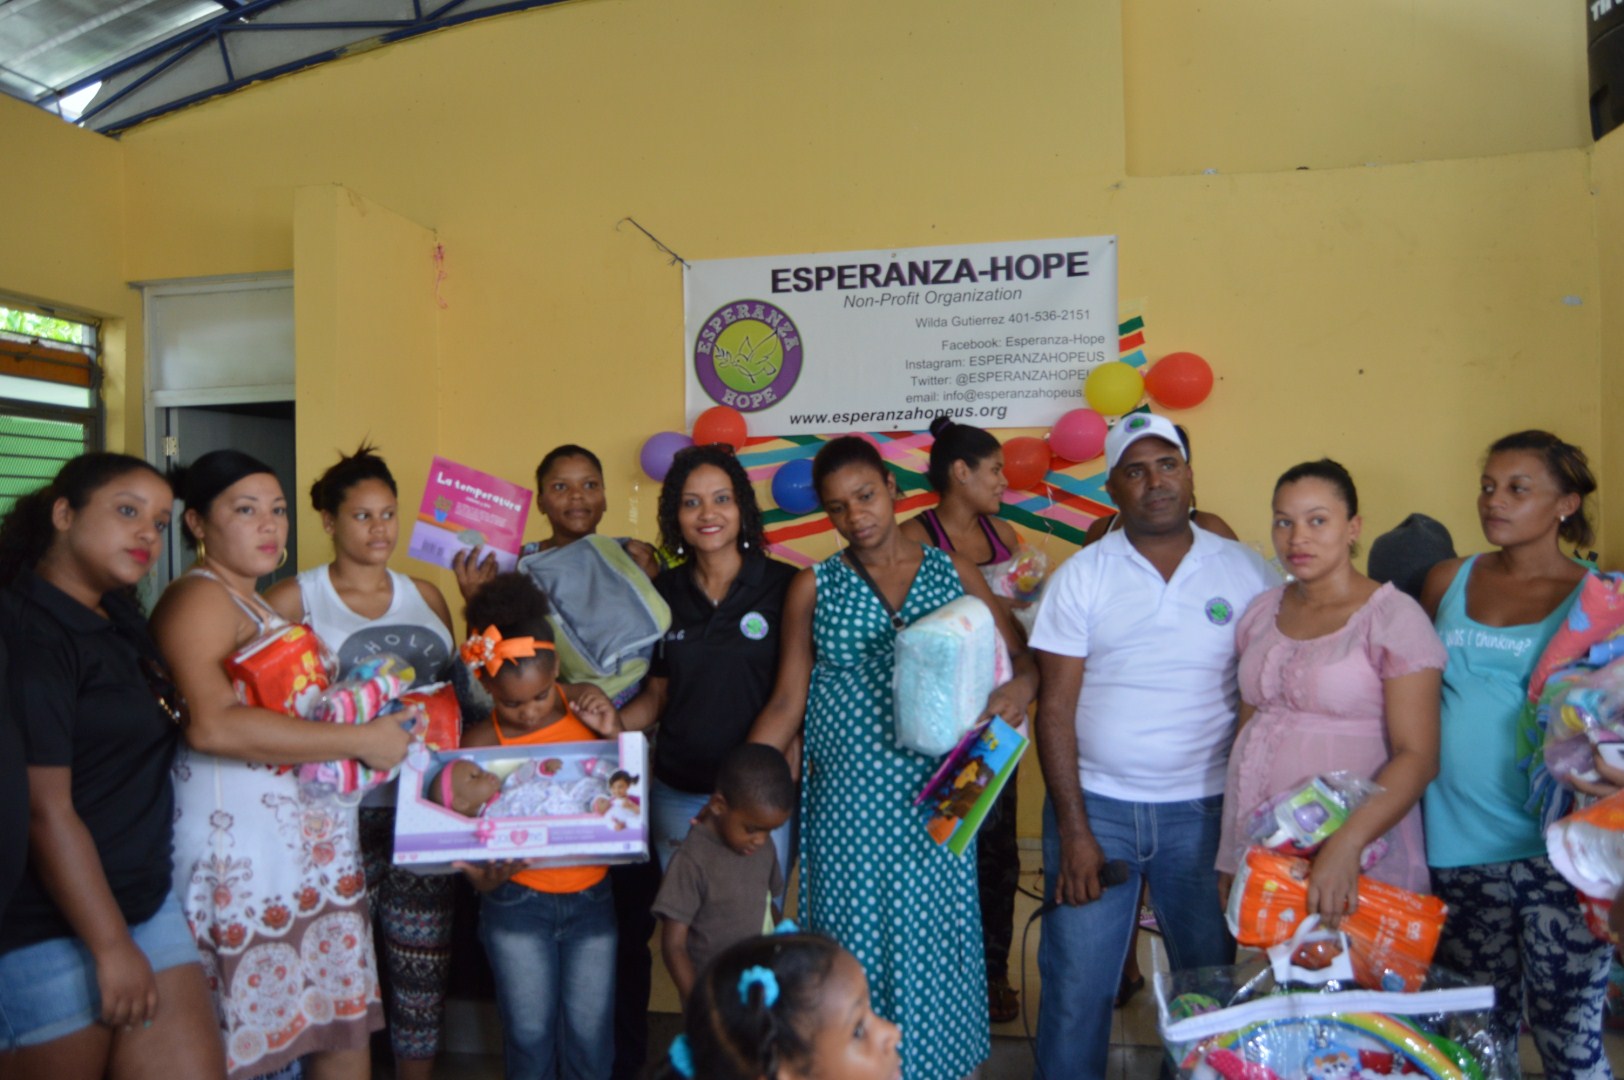 The mothers and some of their children holding toys, diapers, and clothes, different angle